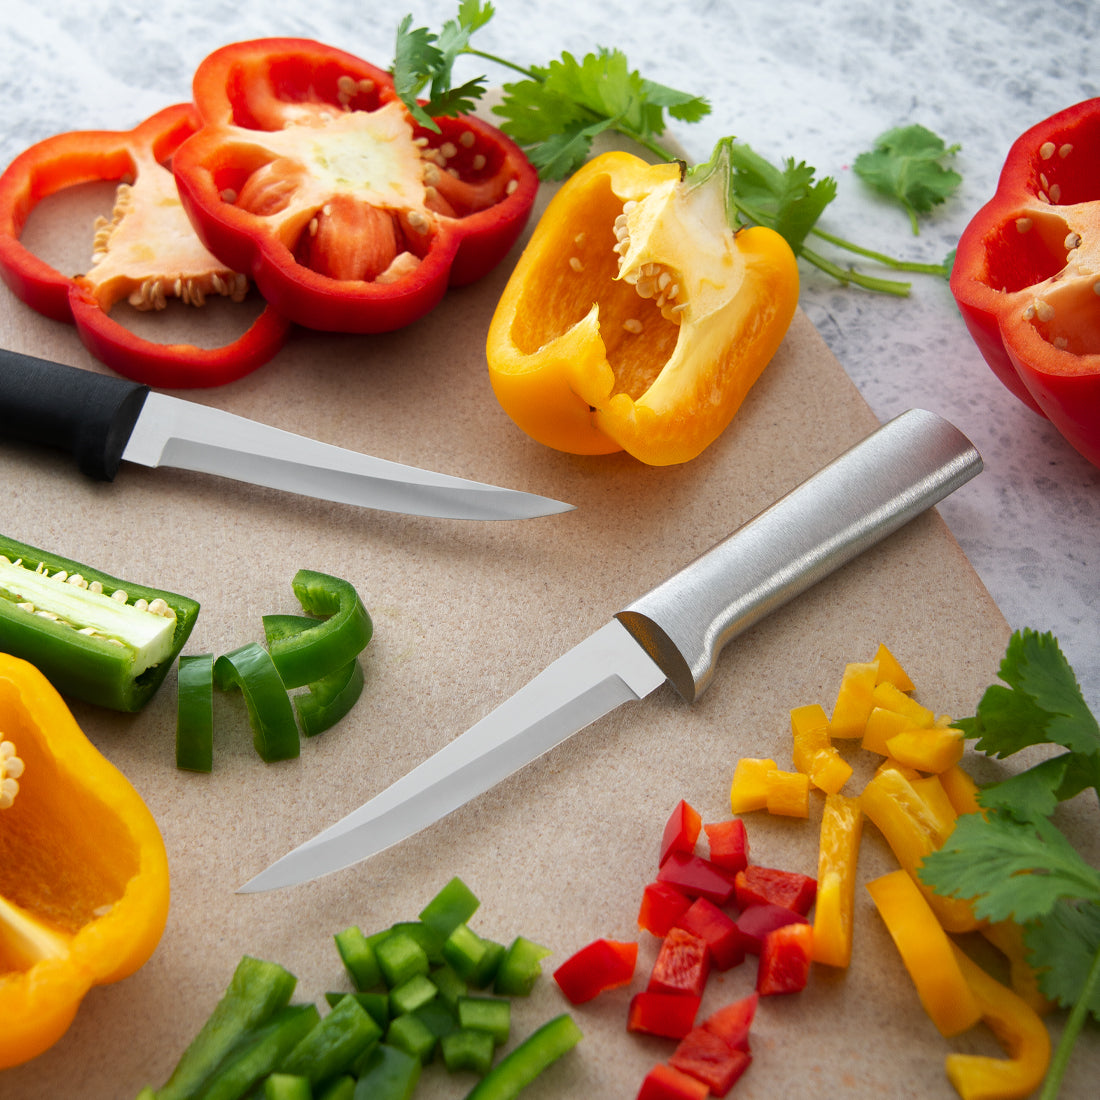 Silver handle and black handle Super Parer knives on a cutting board next to diced peppers